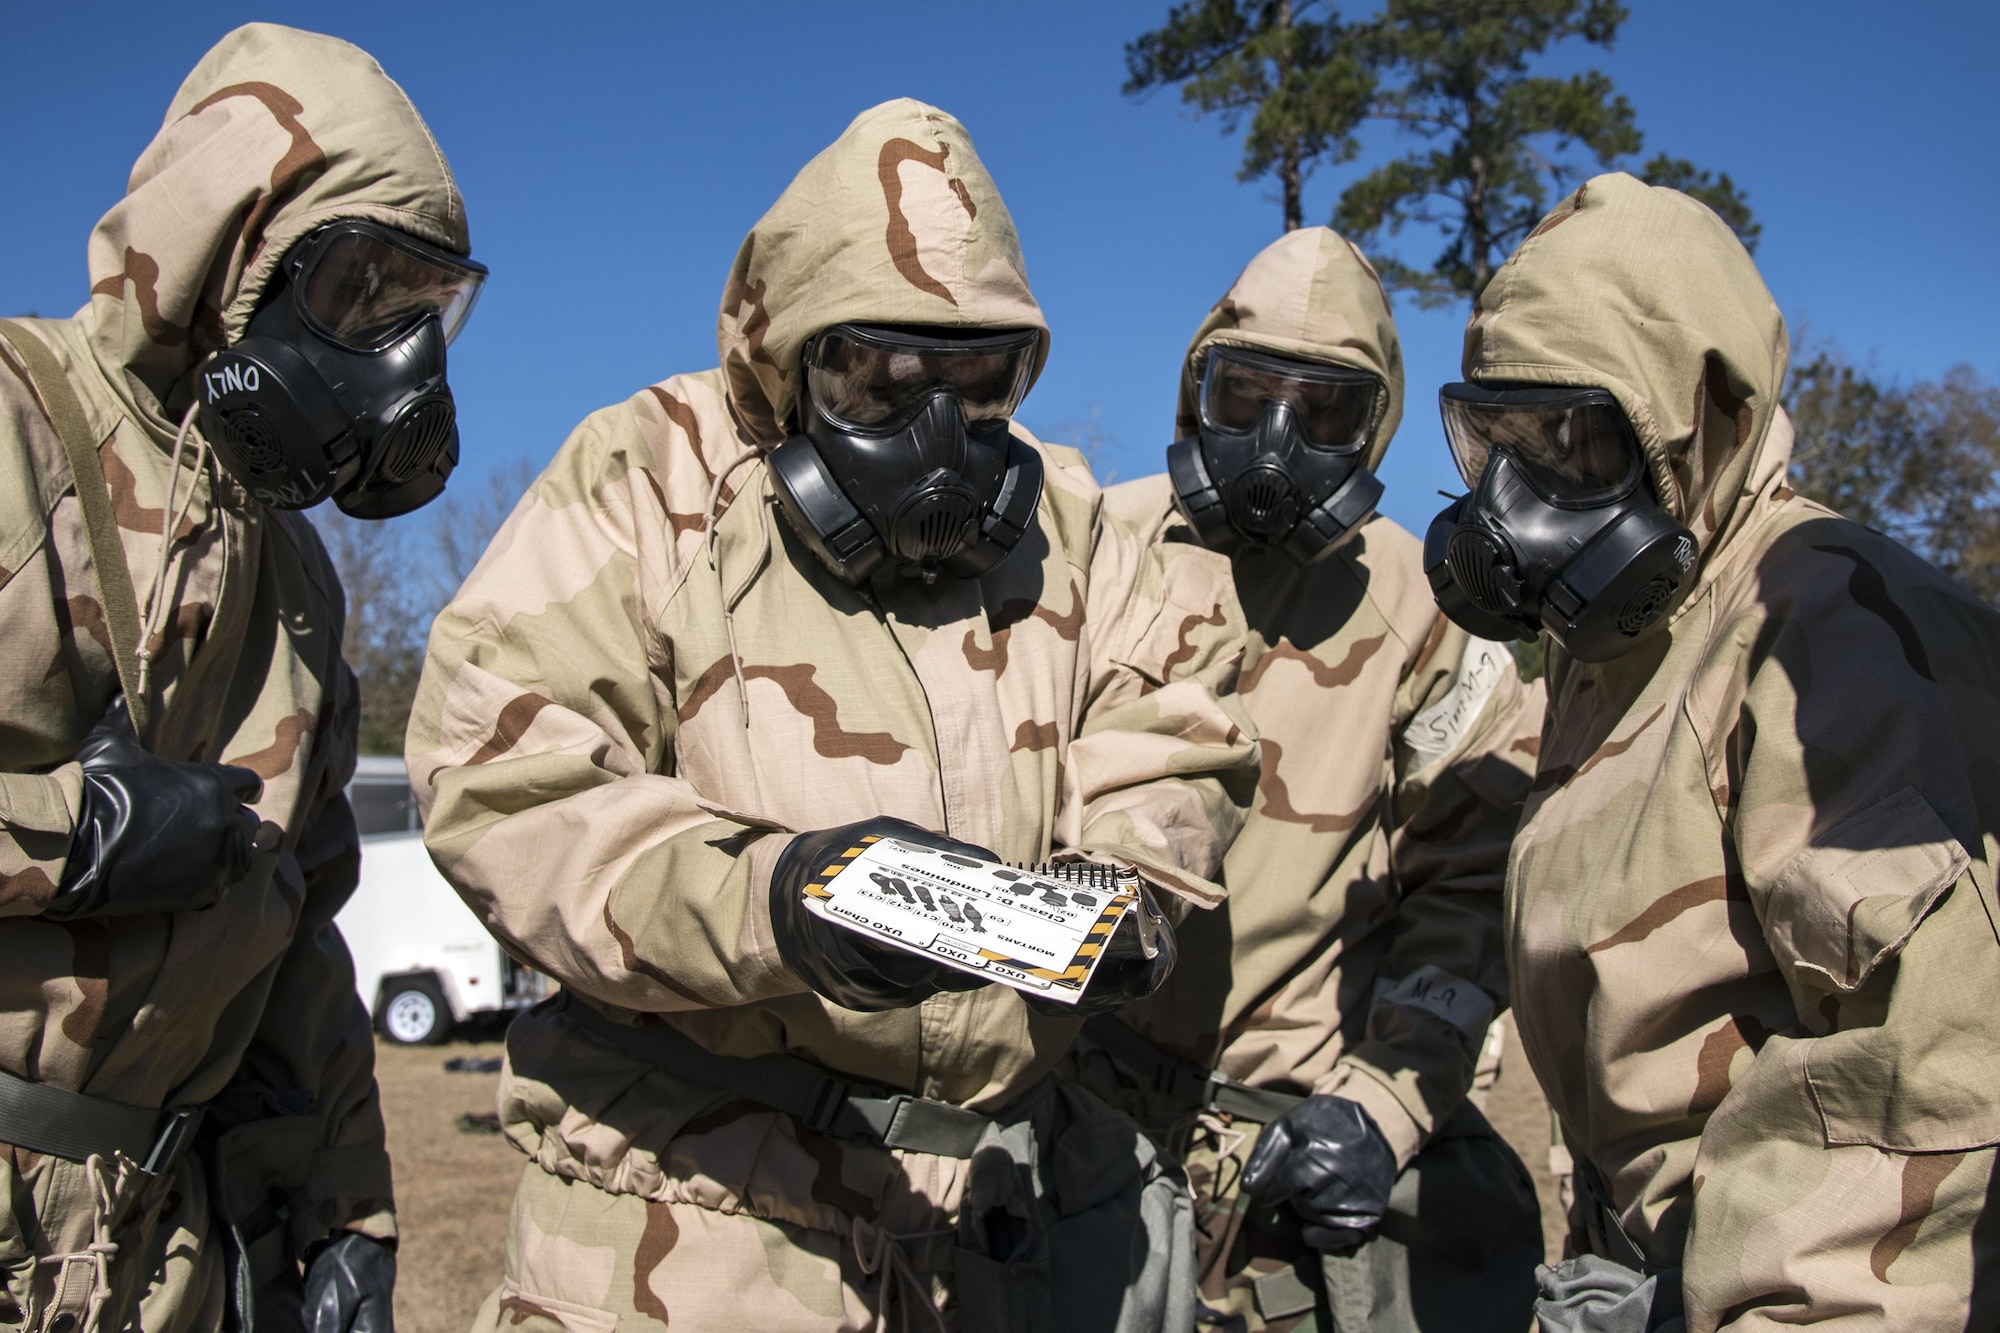 Airmen read an Airman’s manual, Feb. 5, 2018, at Moody Air Force Base, Ga. Airmen participated in a chemical, biological, radiological and nuclear defense (CBRNE) class to better prepare them to combat enemy attacks while also familiarizing them with mission-oriented protective posture (MOPP) gear. (Air Force photo by Airman Eugene Oliver)